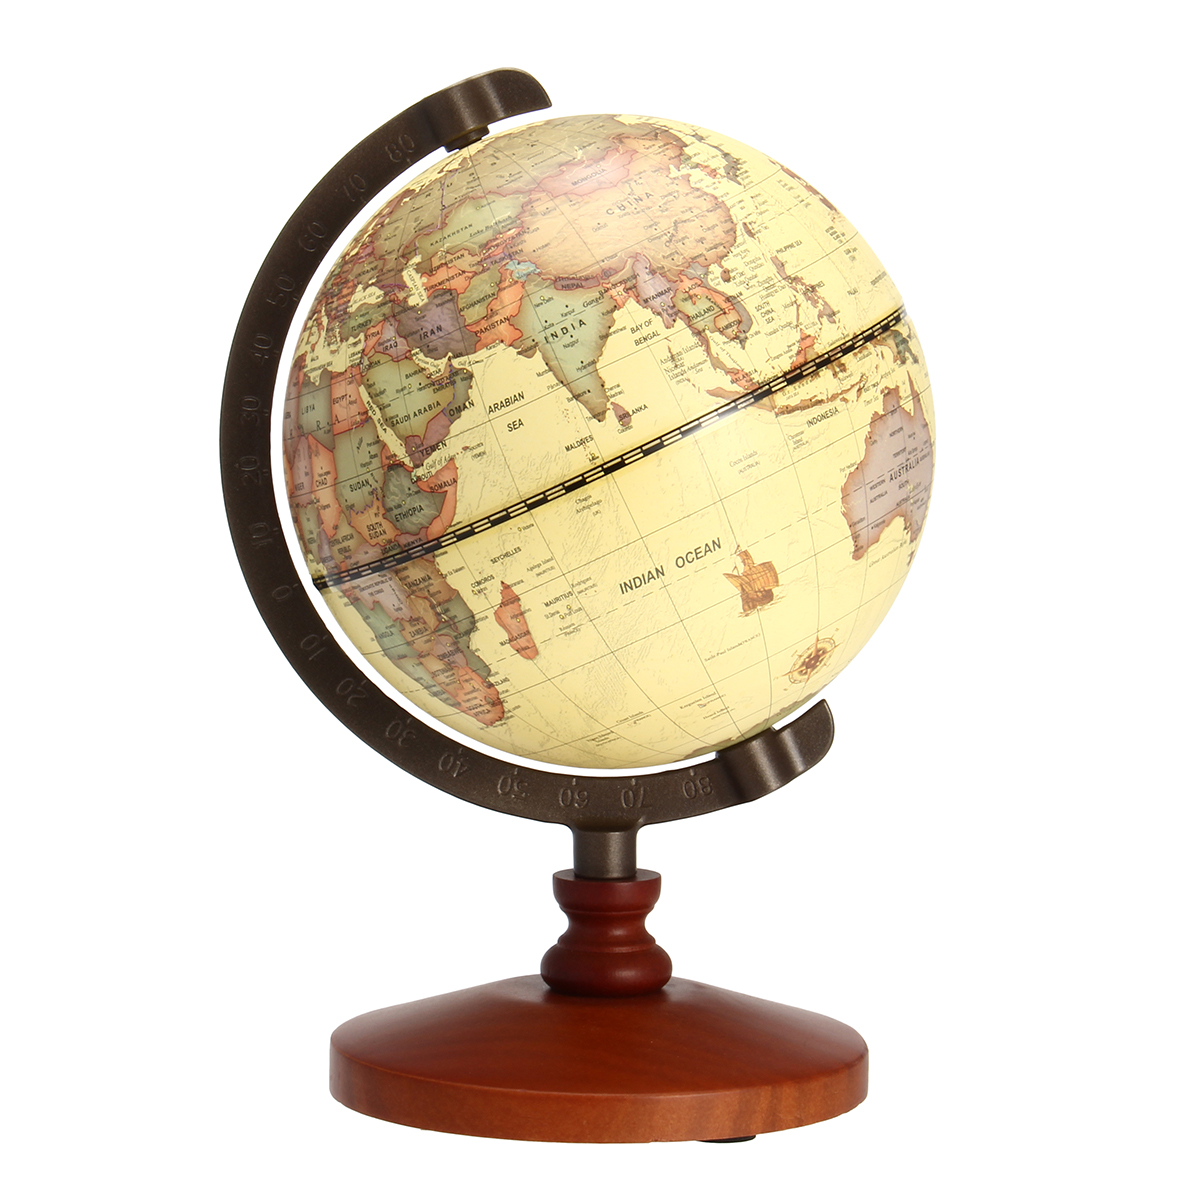 

5.5" Vintage Desktop Table Rotating Earth World Map Globe Antique Geography Home Decor Gift Toys